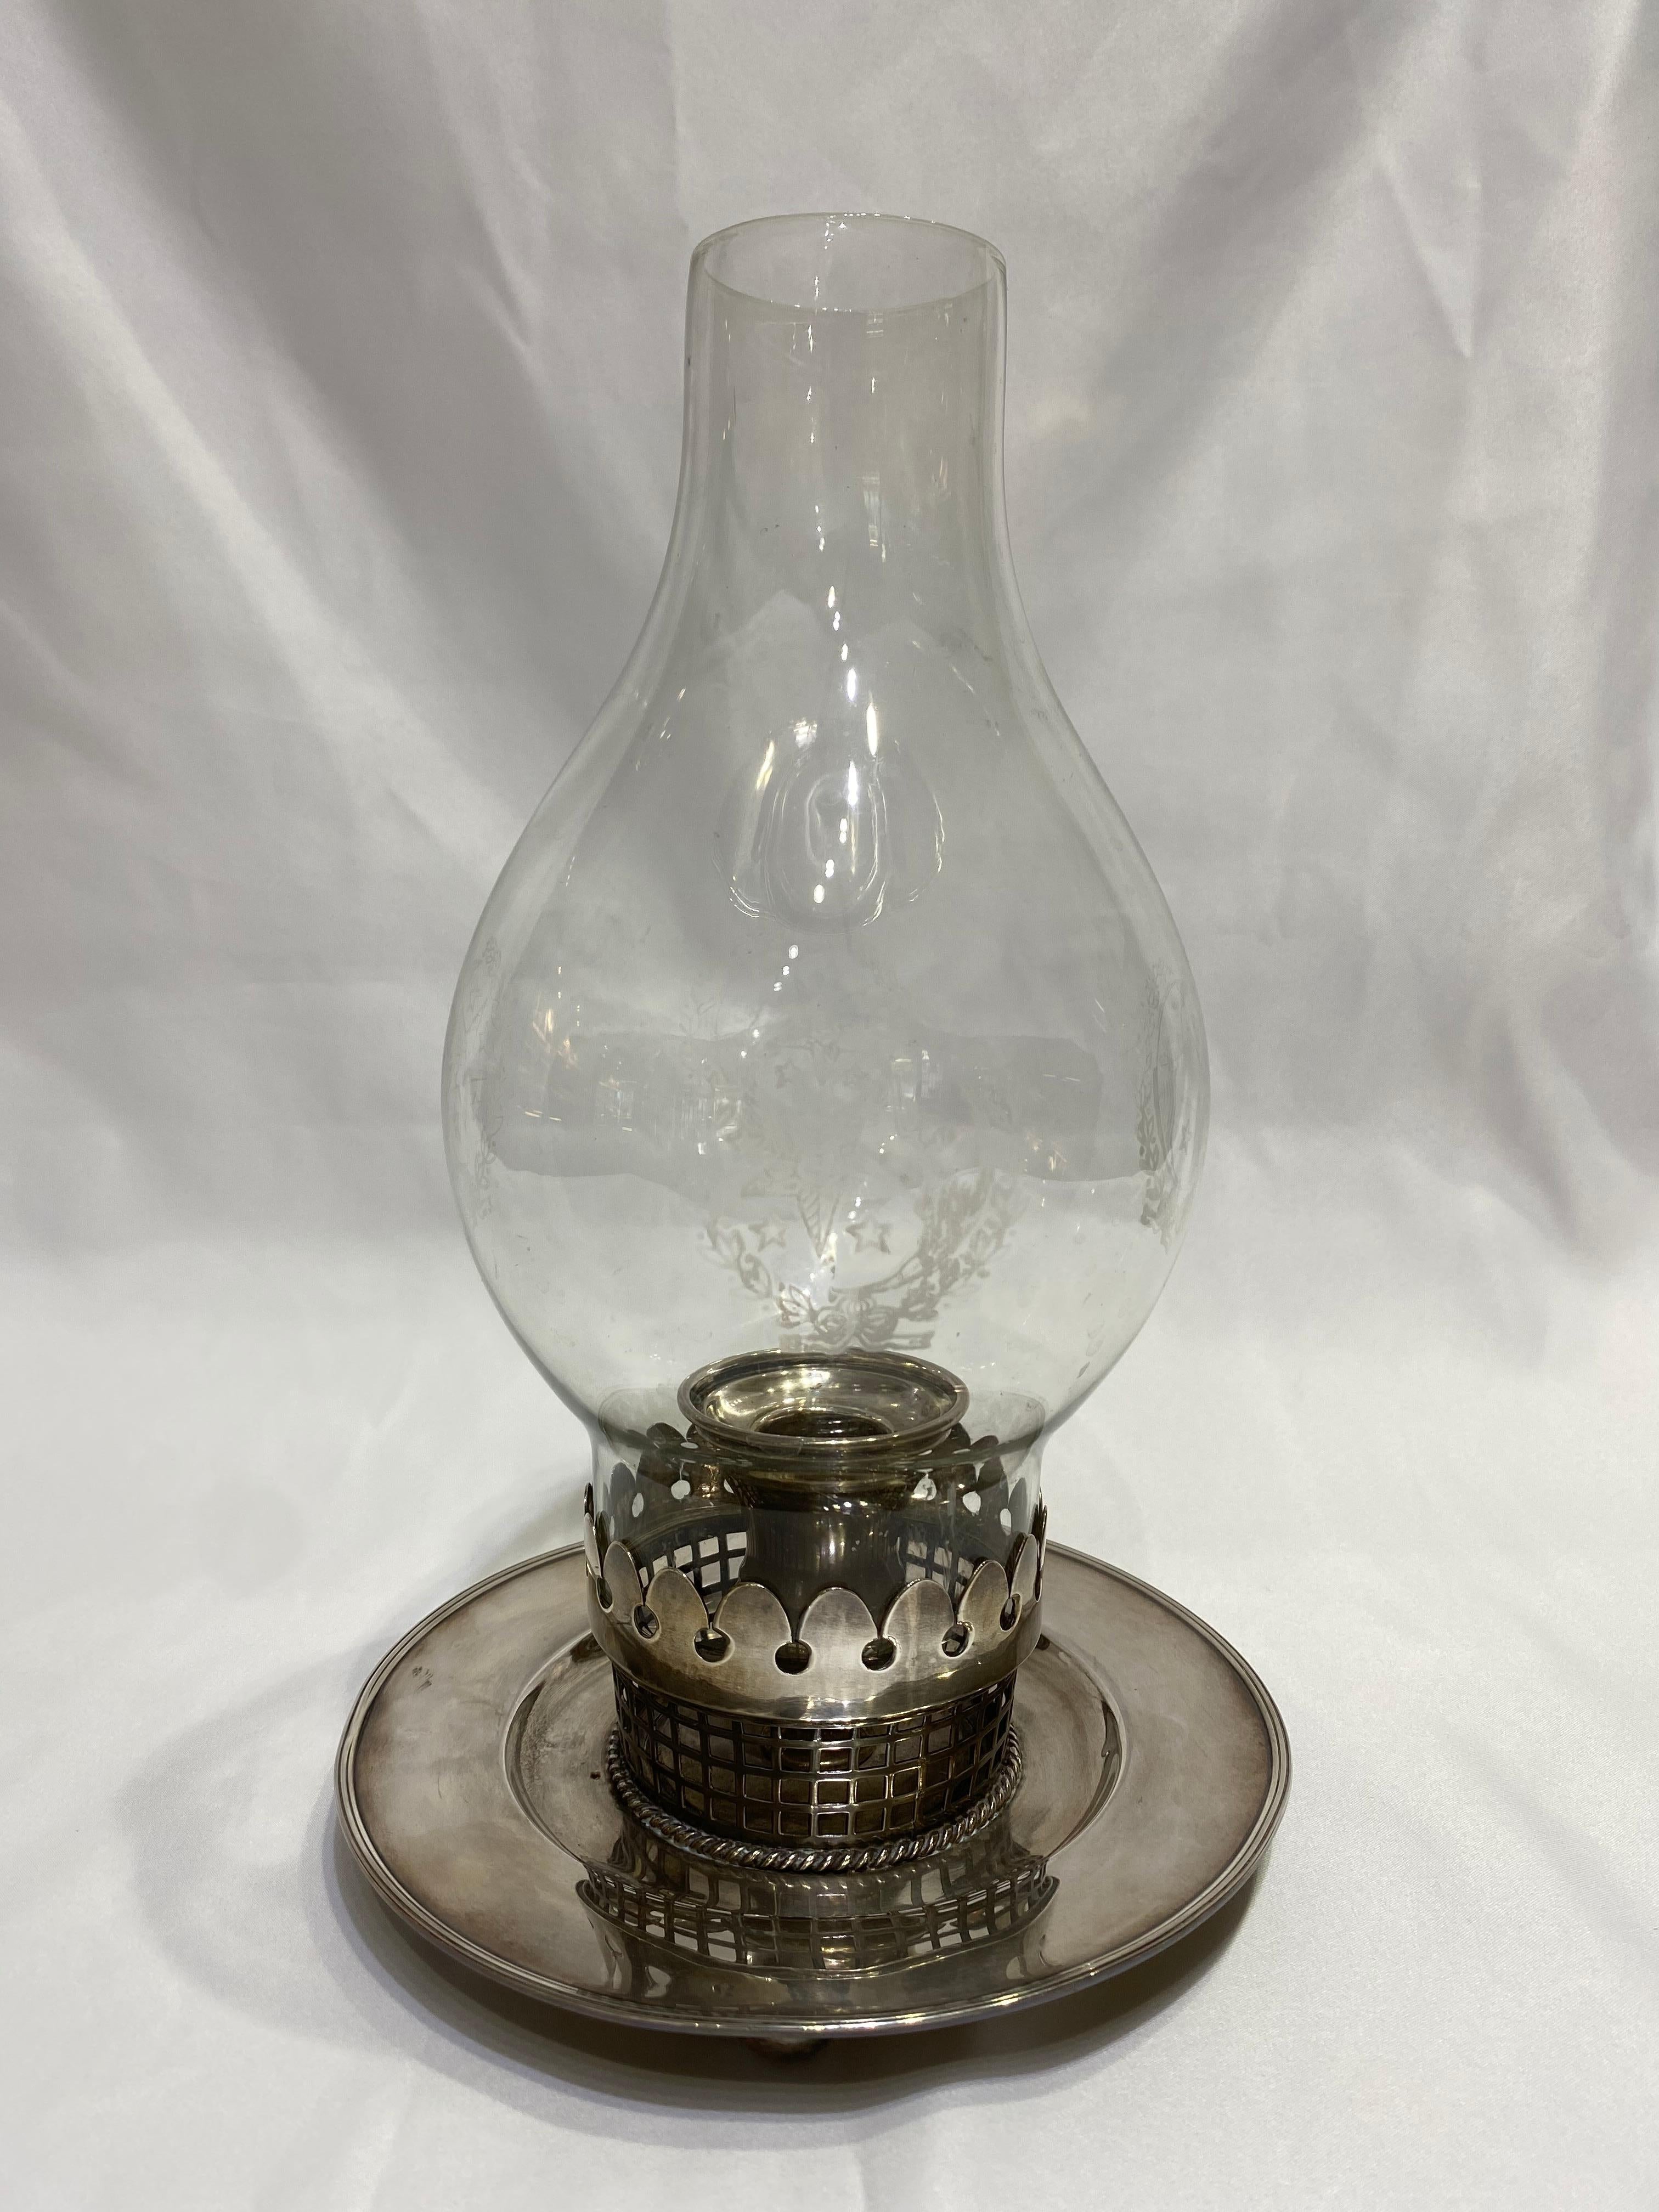 Product details:

Circa 1900.
Featuring sterling silver and hand blown etched glass with star motif. 
Stamped Sterling on the bottom.
The weight is 478.8 g. and 399.0 g. 